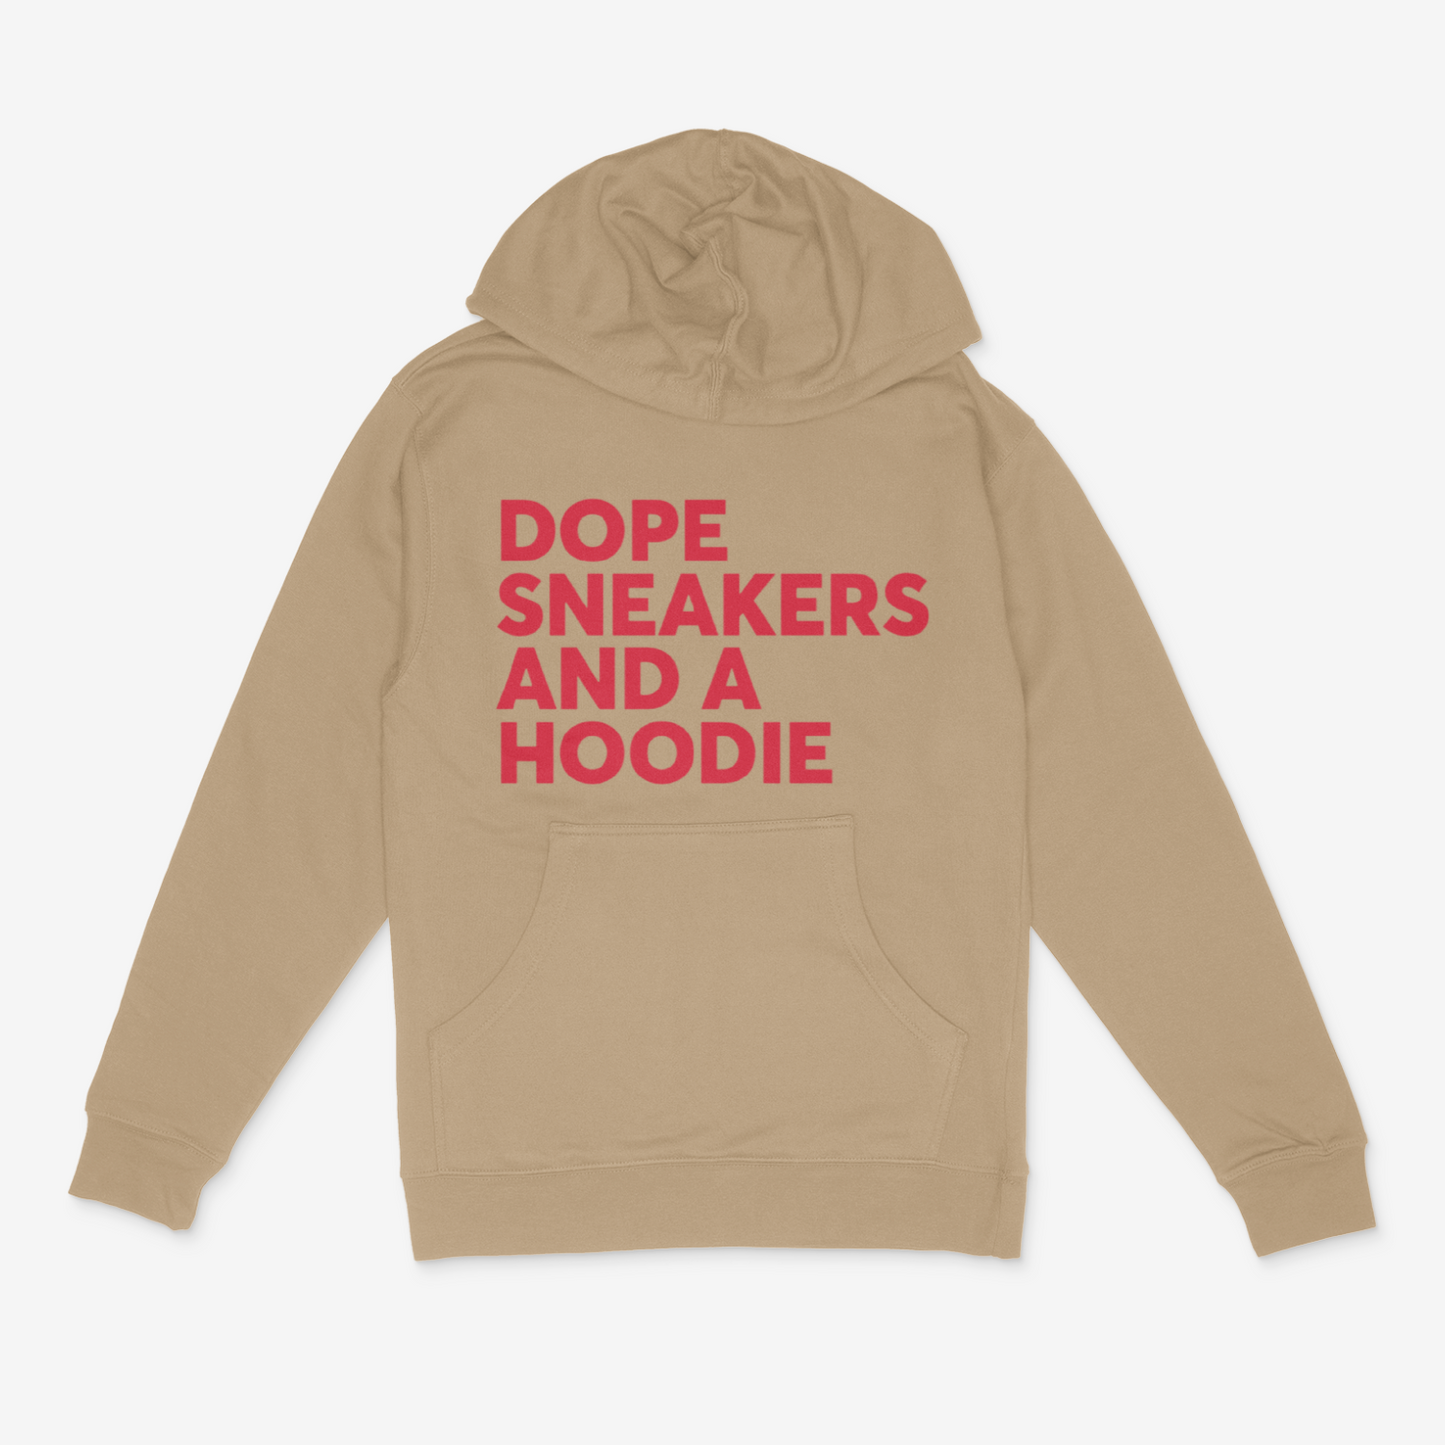 Dope Sneakers and a Hoodie (Red)